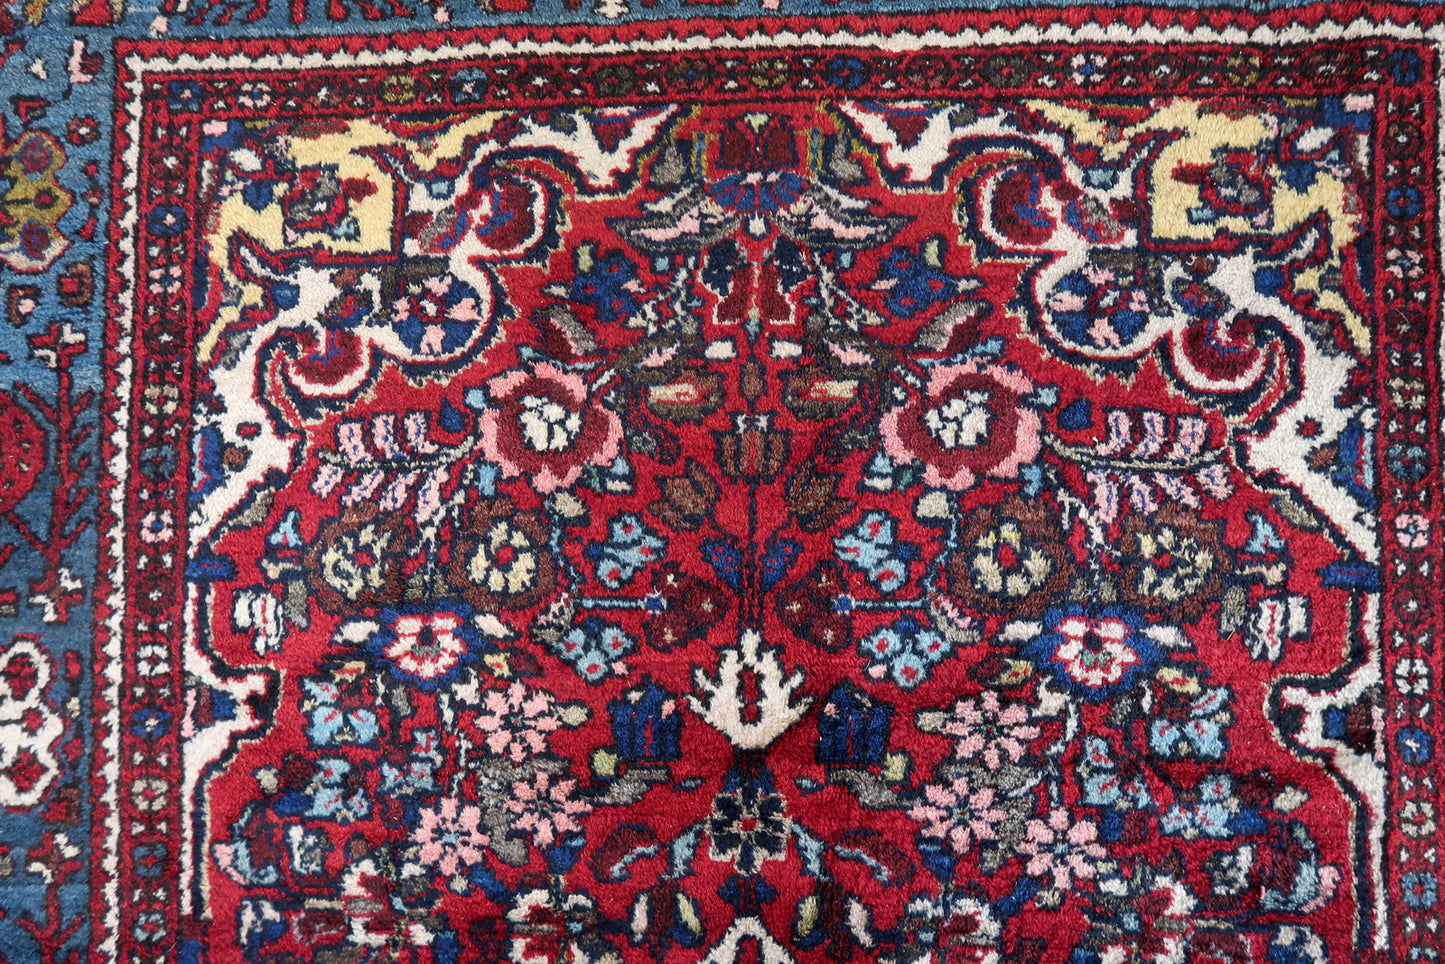 Close-up of navy blue hues on Handmade Vintage Persian Malayer Rug - Detailed view showcasing the deep navy blue tones.